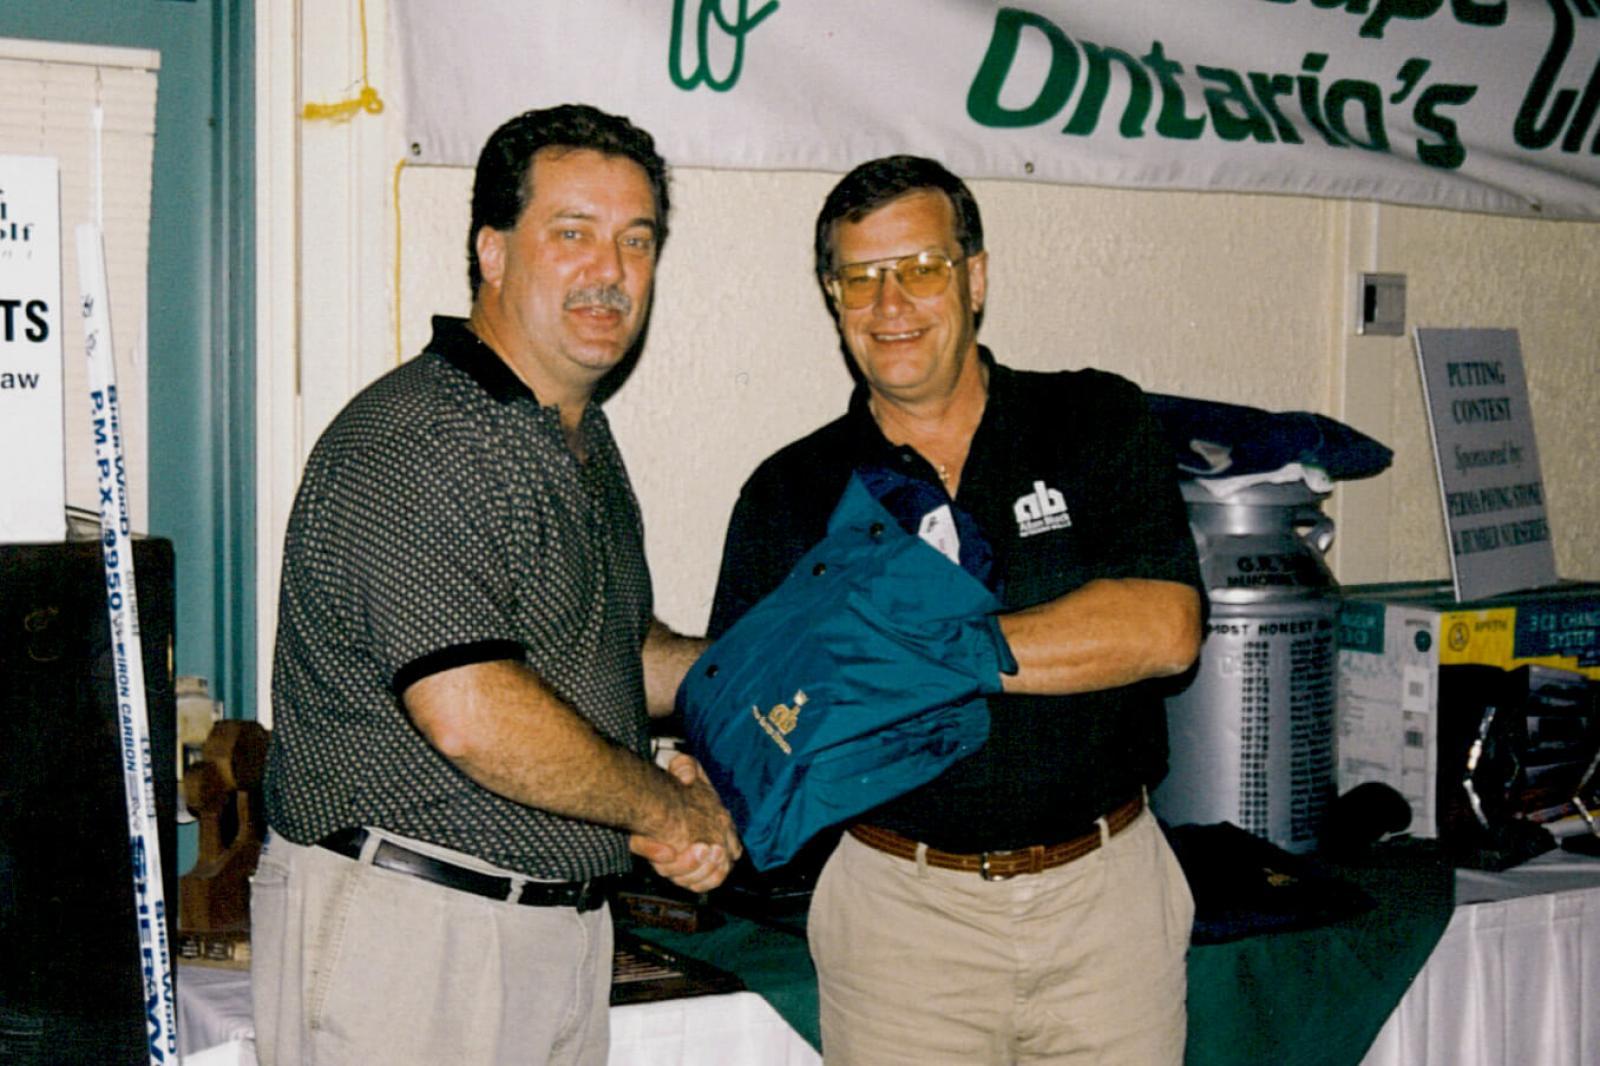 The Toronto Chapter’s Dick Sale Memorial Charity Golf Tournament raised over $1,500 towards the Hospital for Sick Children. In photo, Maurice Le Blanc, left, receives the prize for the longest drive from donor Marty Lamers of Allan Block.